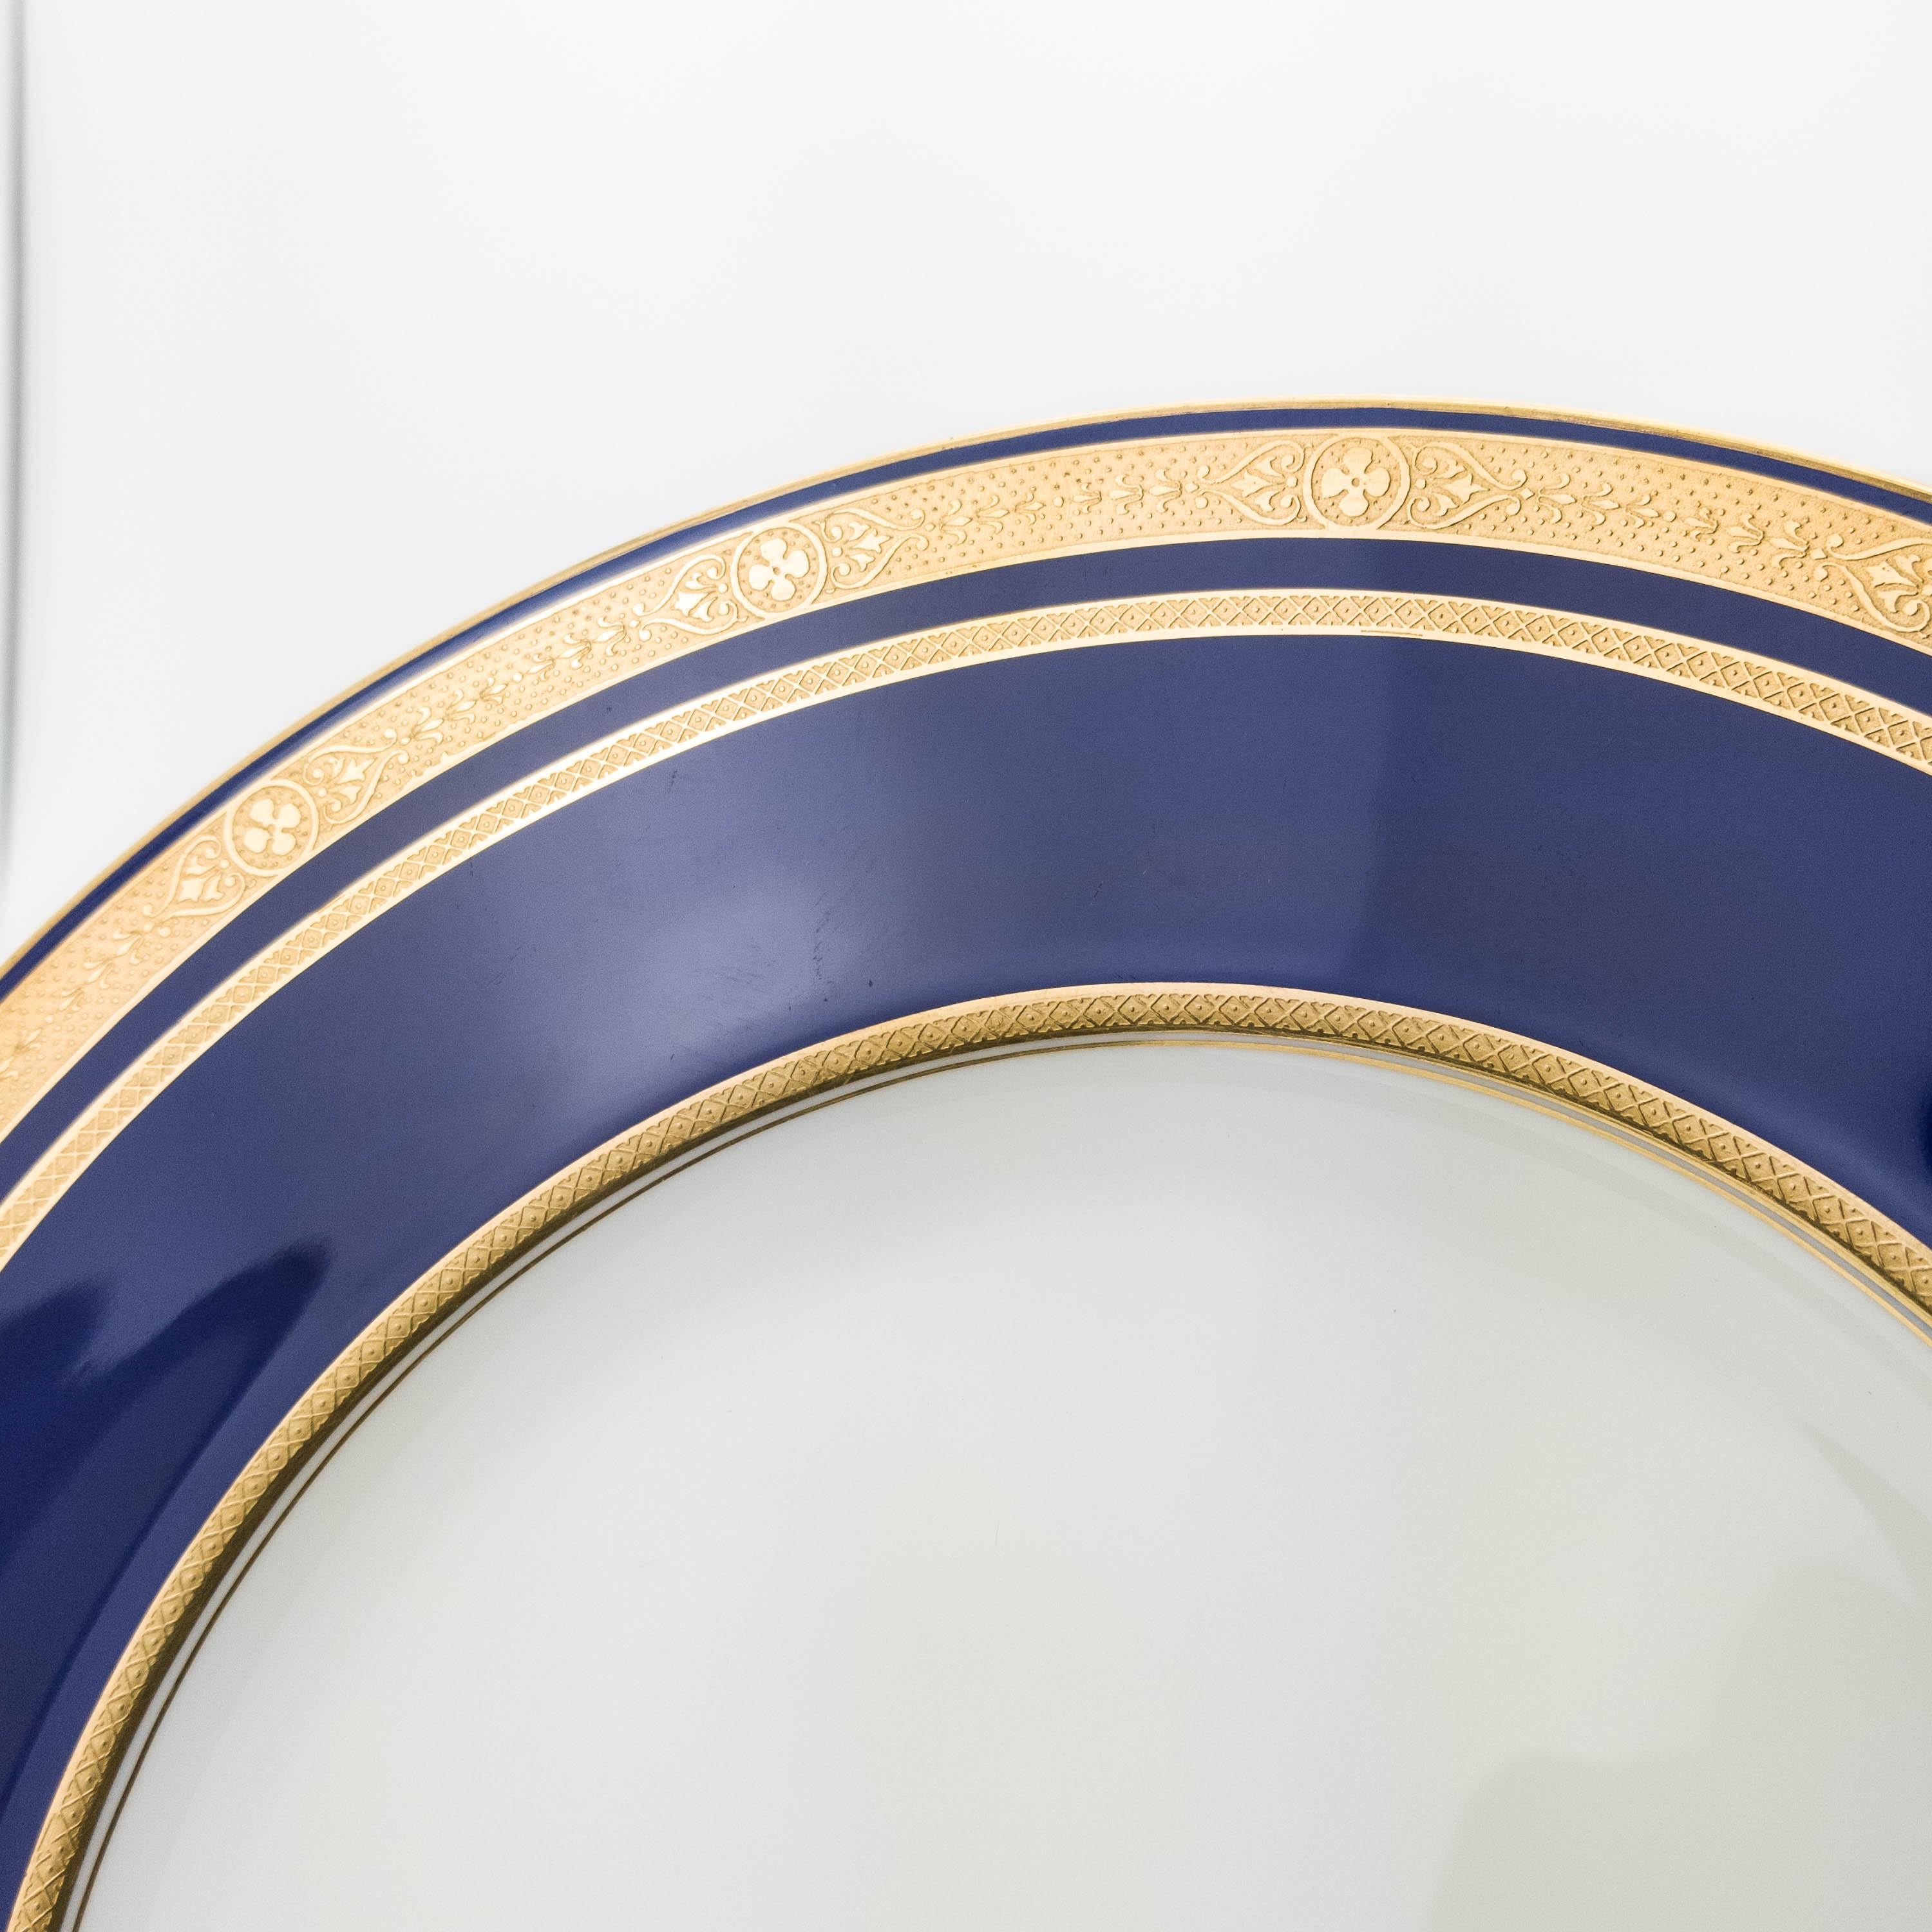 The magic name for custom ordered porcelains during the Gilded Age. This Classic and elegant pattern features a rich cobalt blue collar with an interesting gilt encrusted design. Clear centers and crisp white porcelain will make these a favorite for